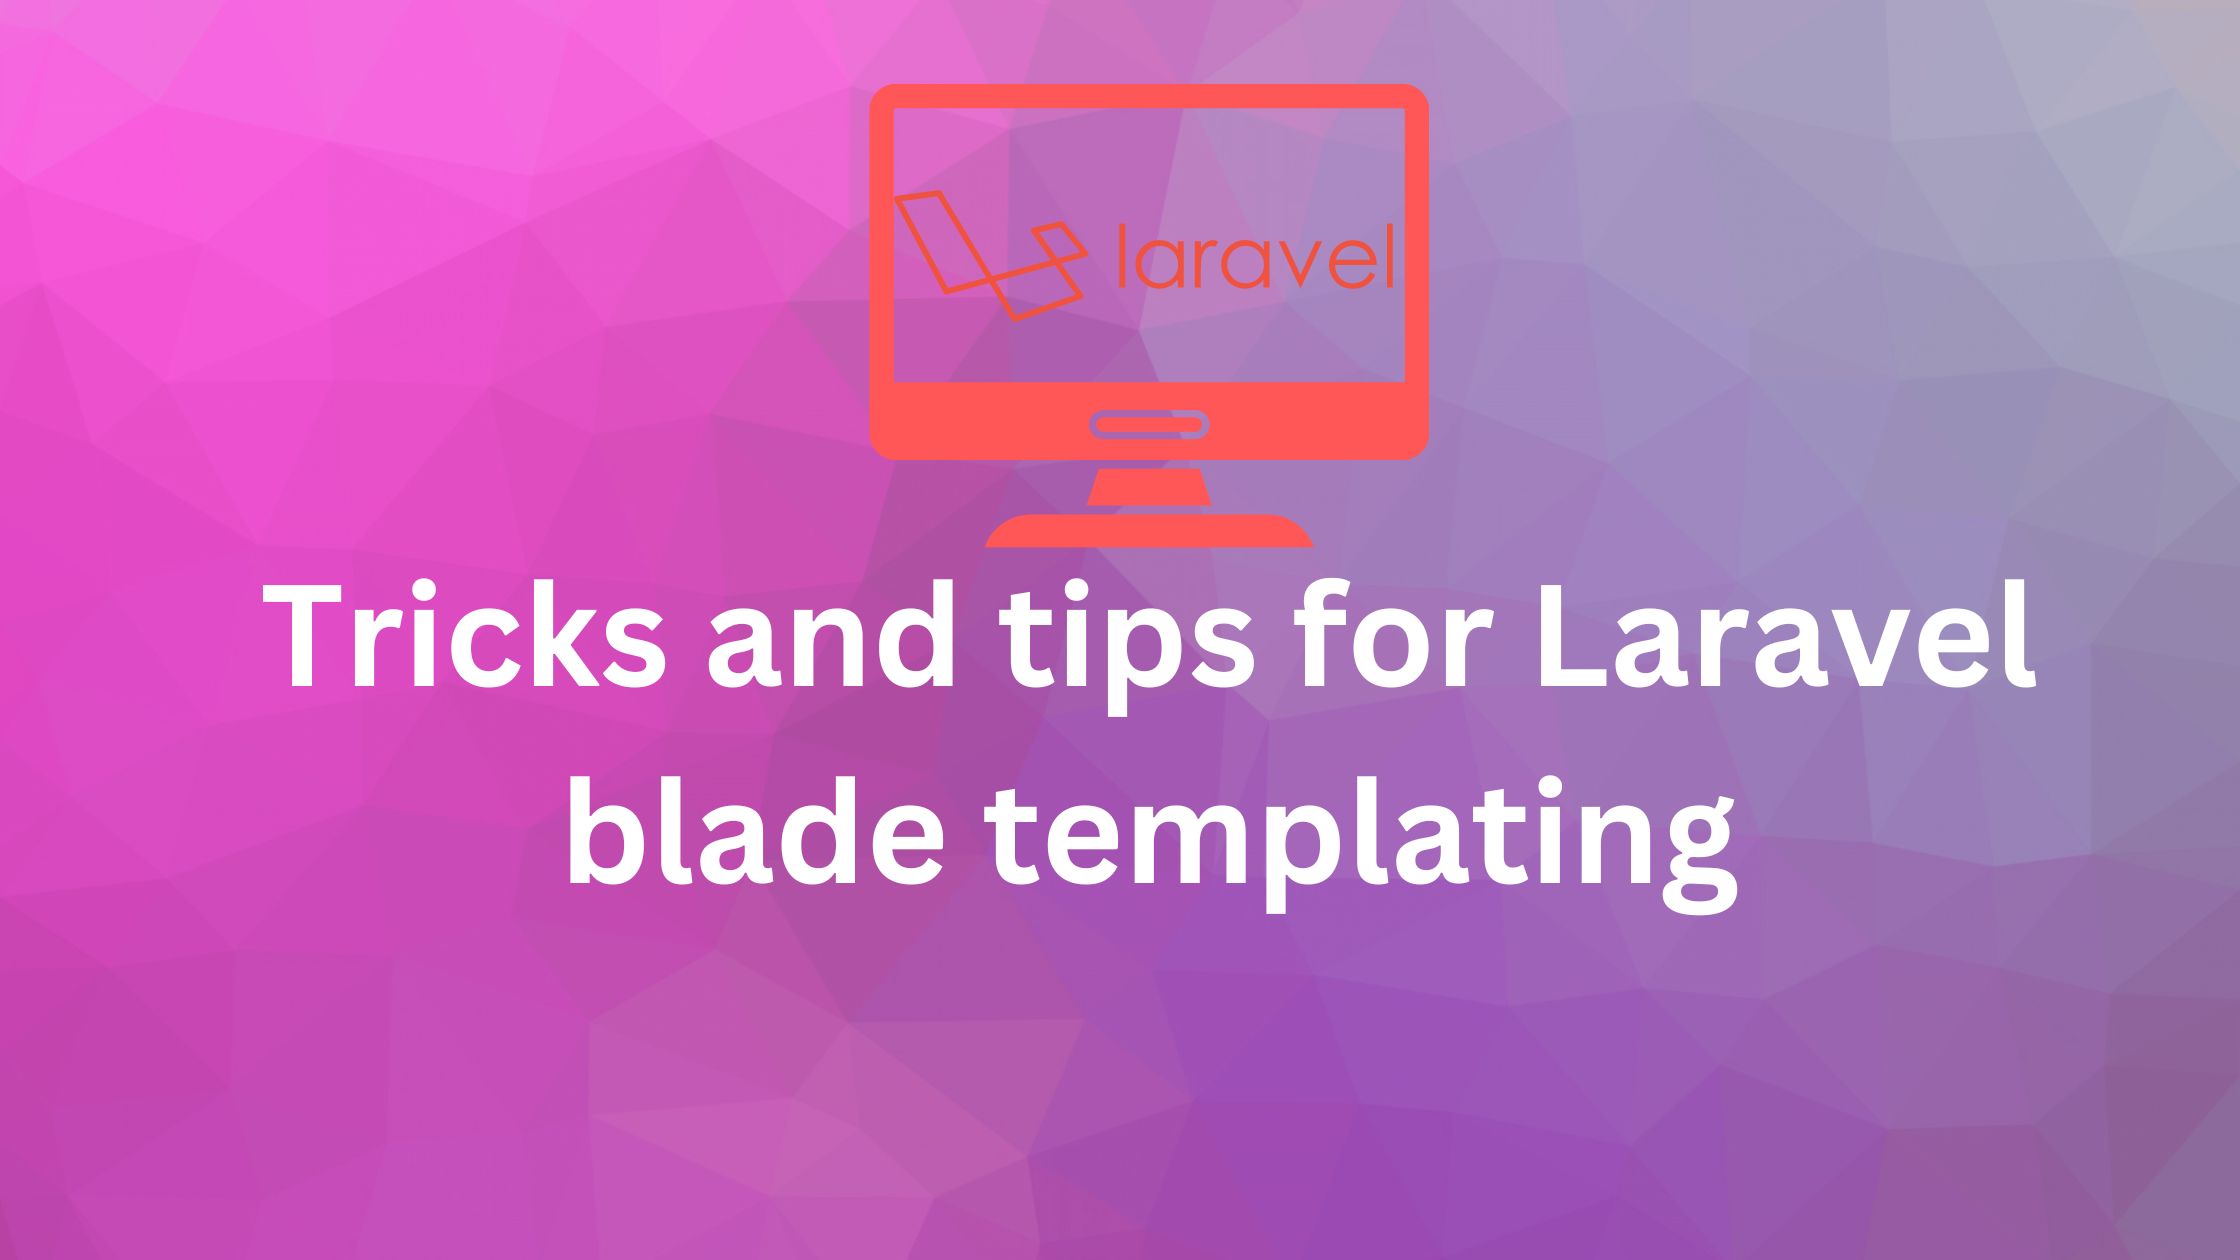 Tricks and tips for Laravel blade templating